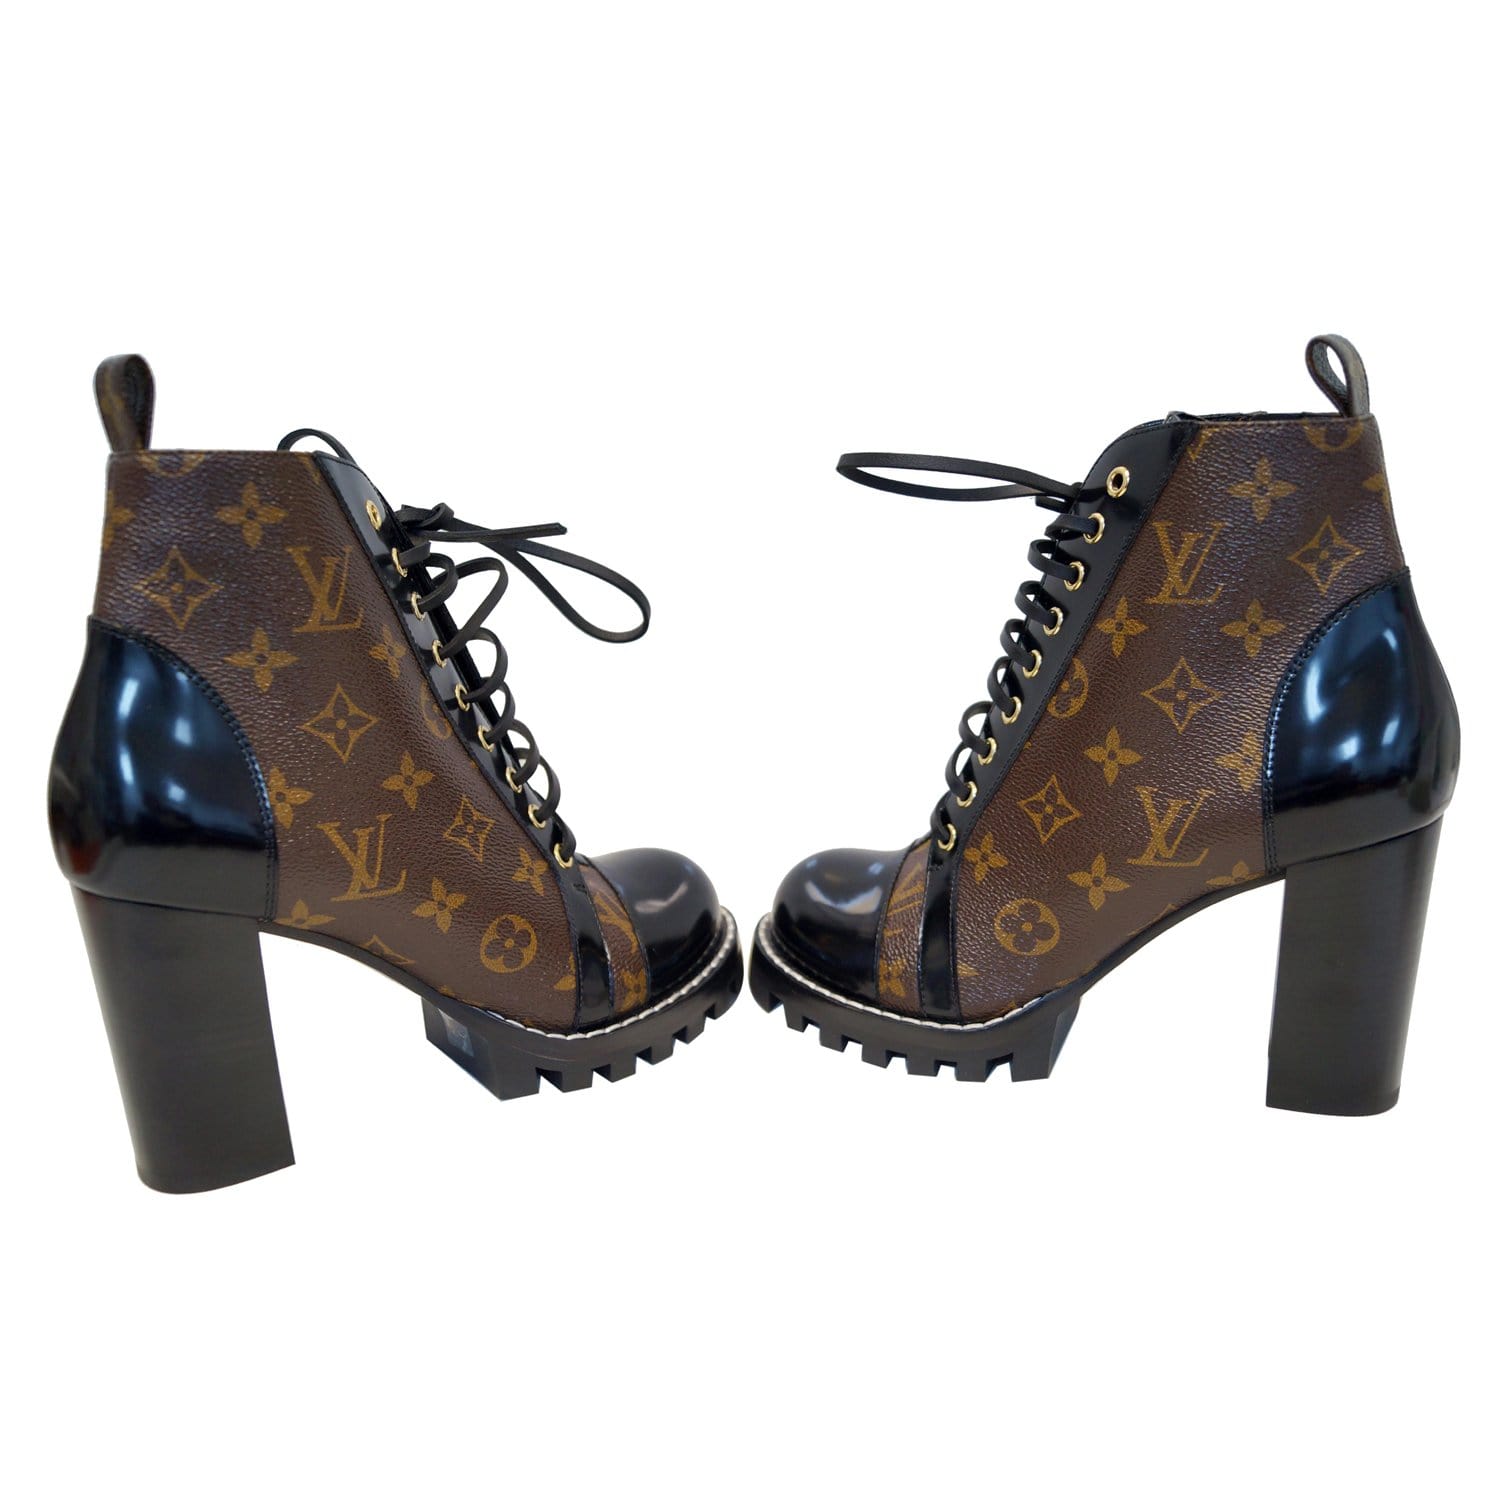 LOUIS VUITTON Monogram Star Trail Ankle Boots 37 - More Than You Can Imagine